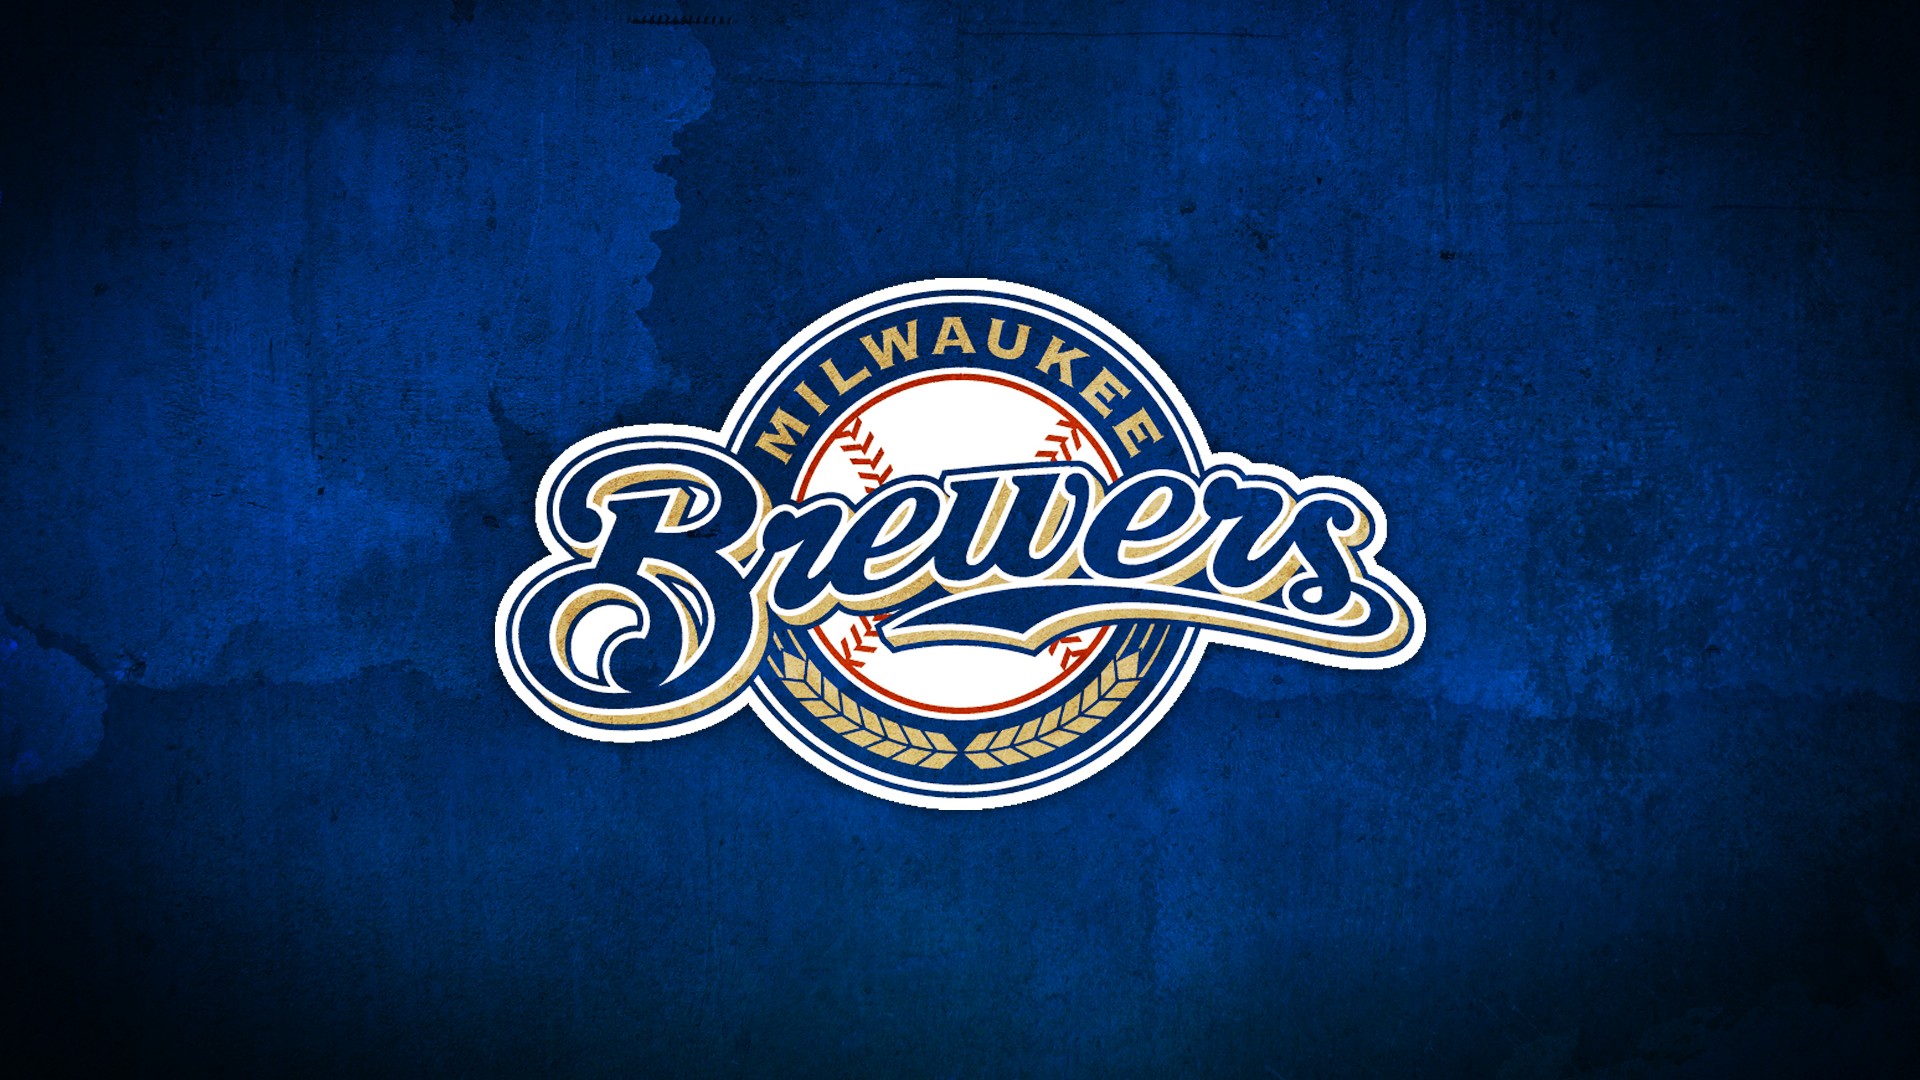 HD Desktop Wallpaper Milwaukee Brewers MLB With high-resolution 1920X1080 pixel. You can use this wallpaper for Mac Desktop Wallpaper, Laptop Screensavers, Android Wallpapers, Tablet or iPhone Home Screen and another mobile phone device